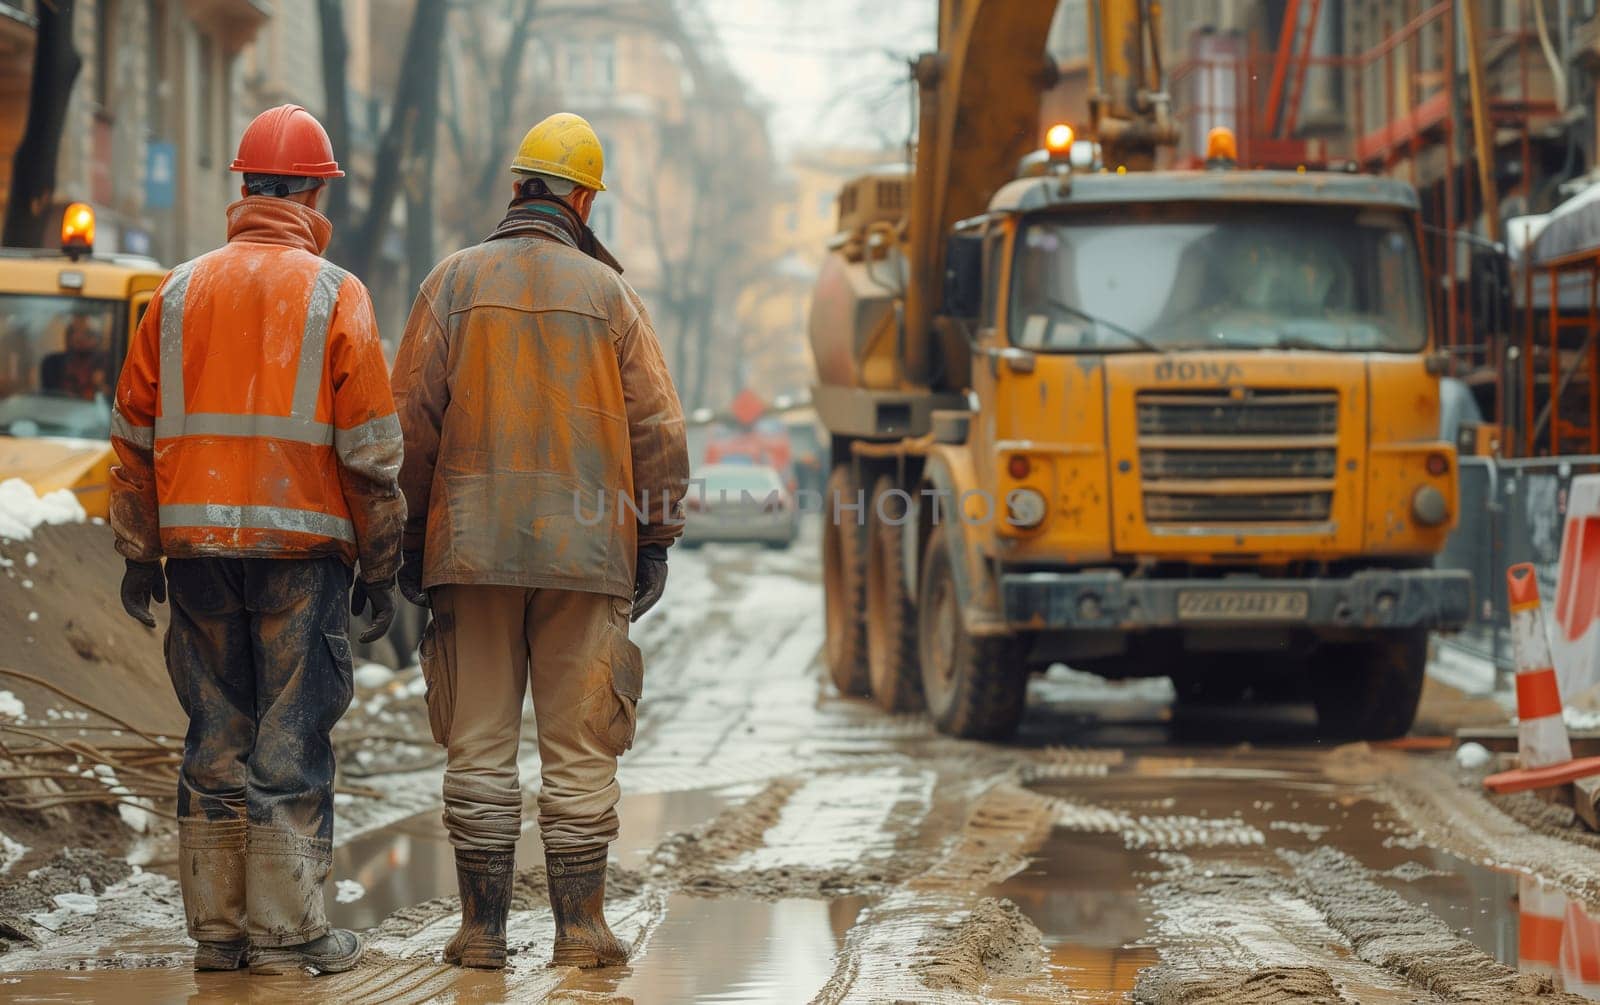 Two construction workers in highvisibility clothing and helmets walk on a muddy street beside a truck with a tire and wheel, surrounded by water